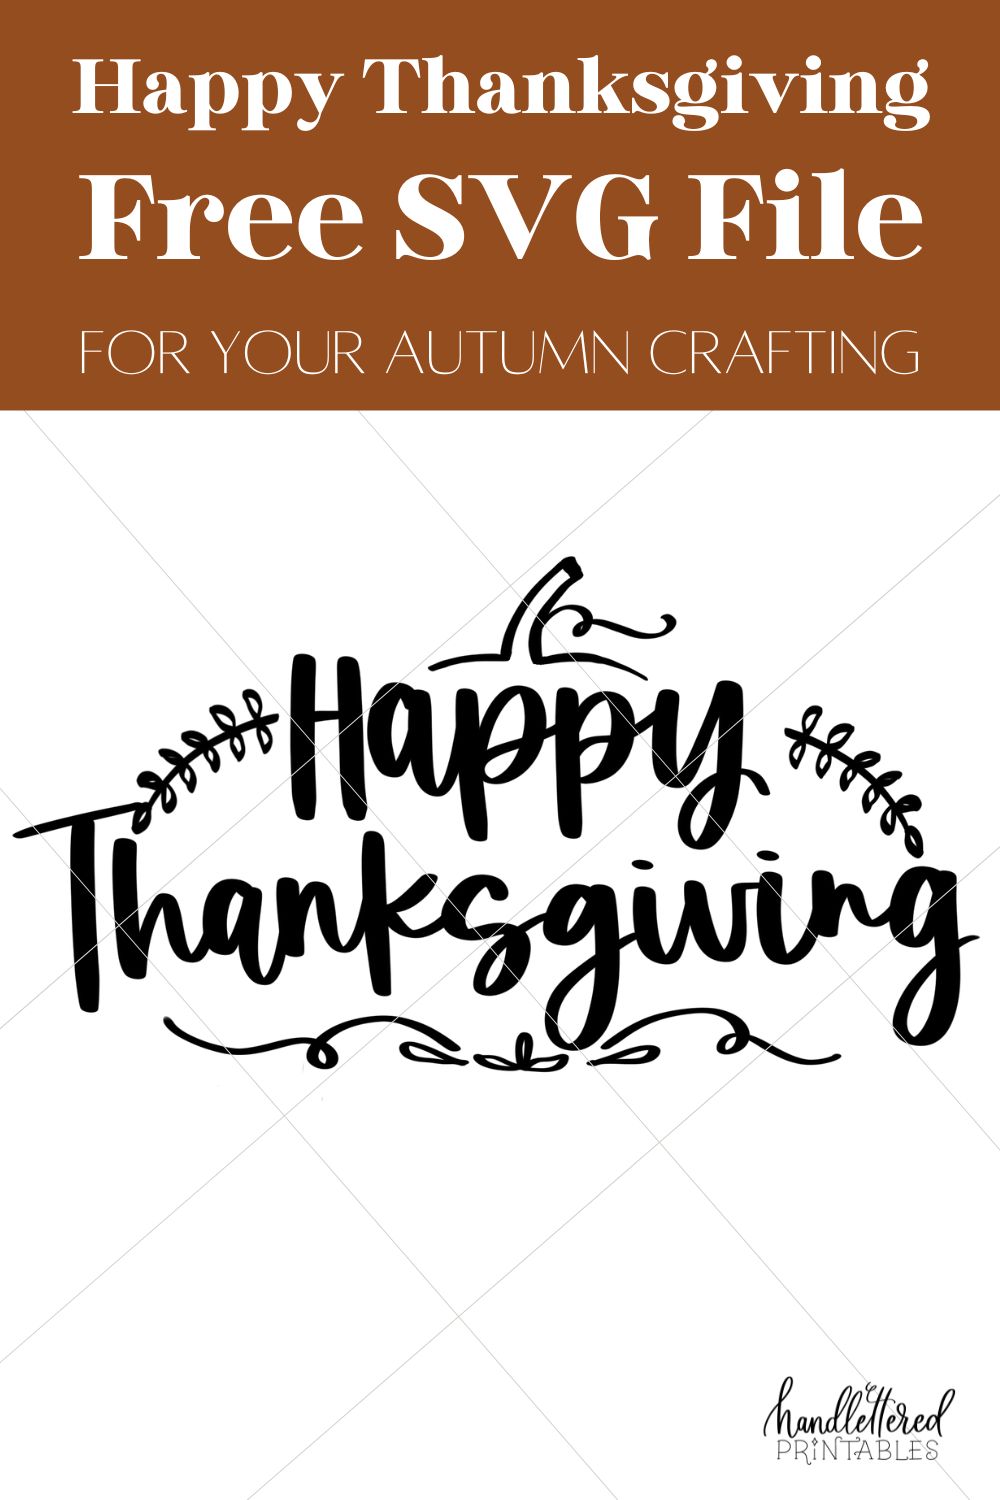 Happy Thanksgiving Free SVG File (file with pin text)